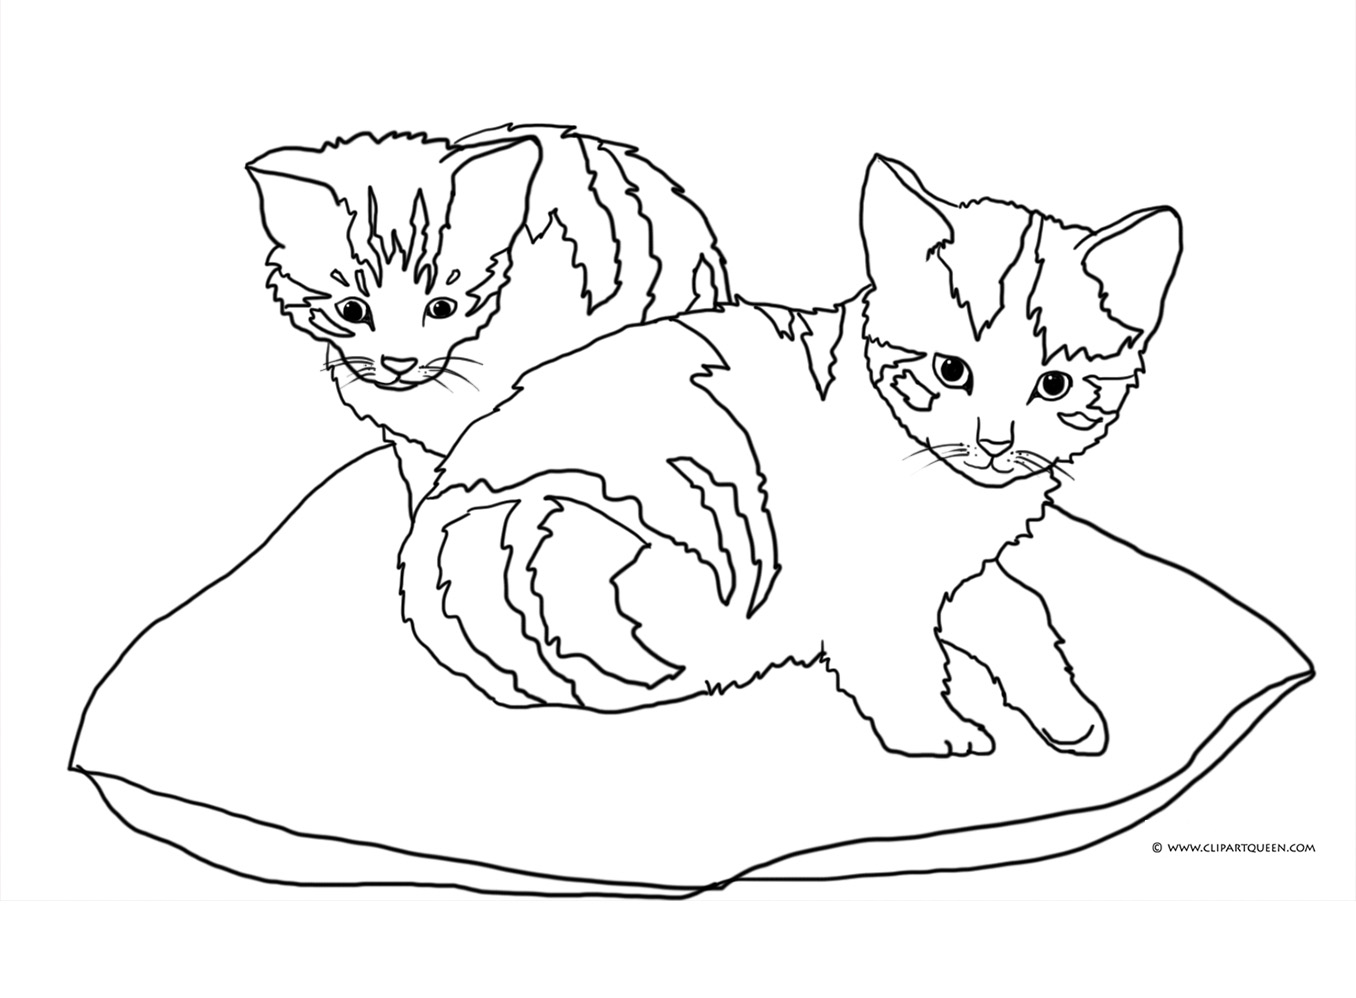 Cat Coloring Page - Coloring Home